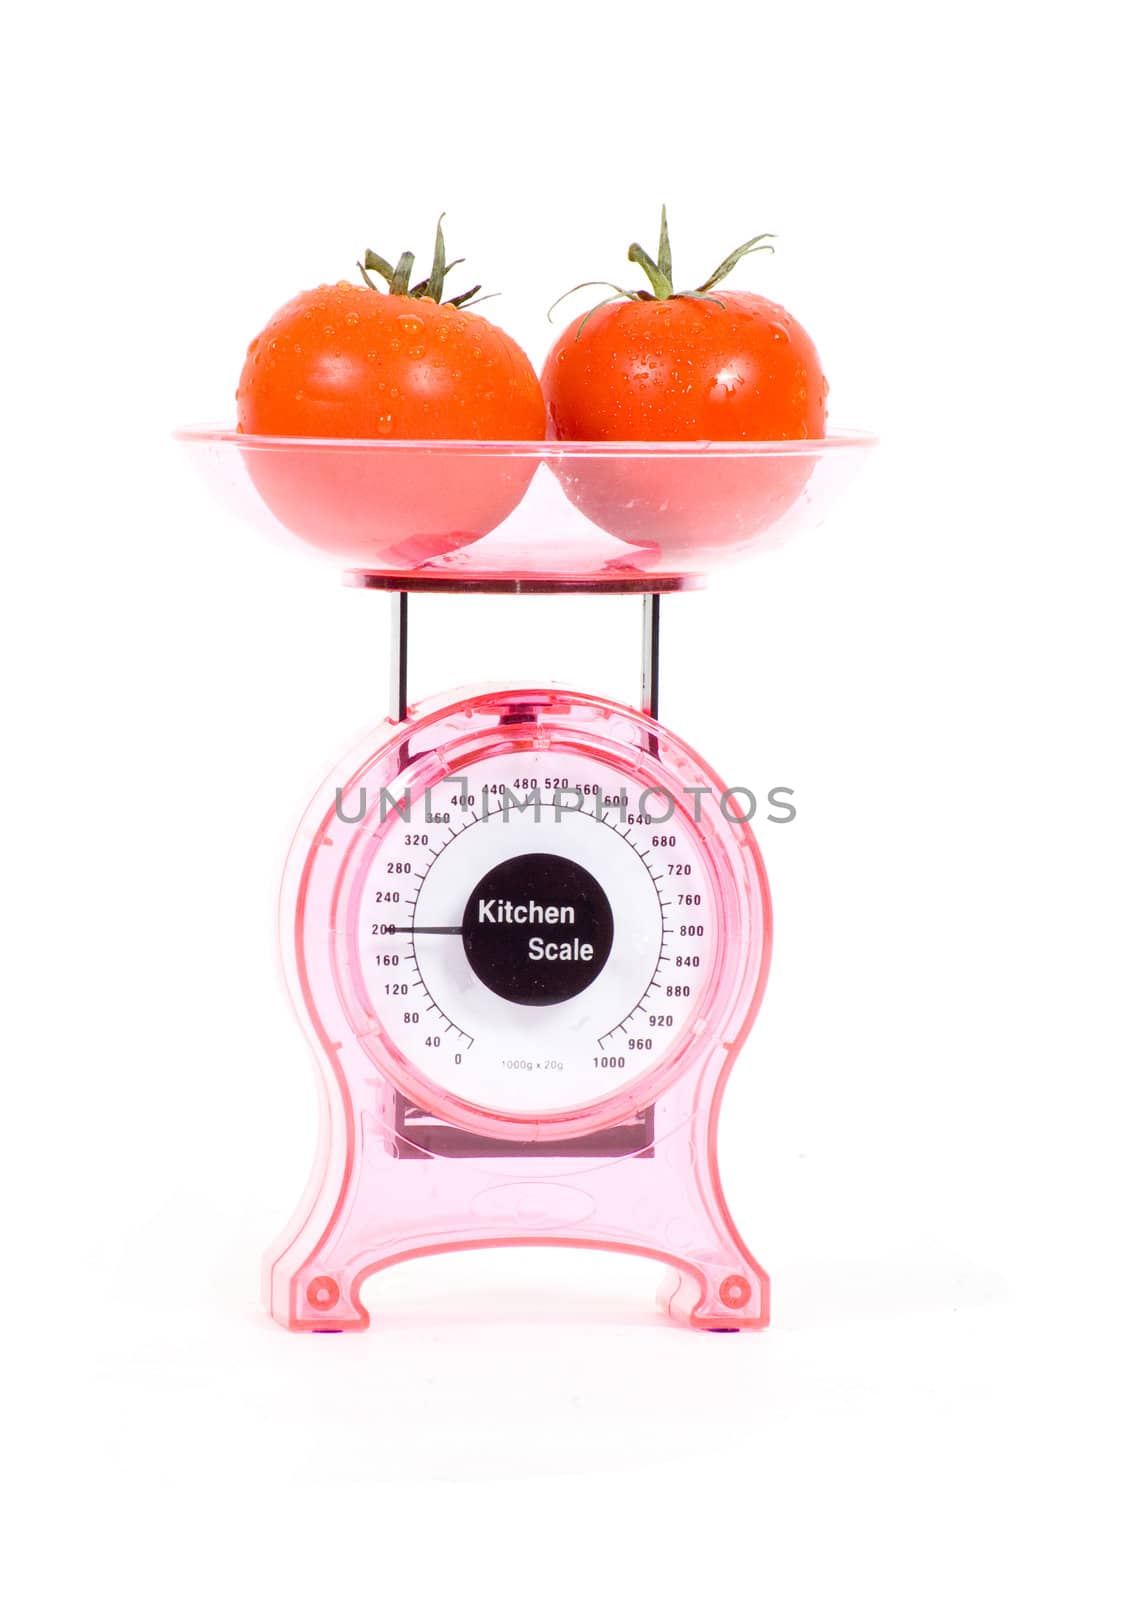 Kitchen Scales with fresh tomatoes isolated over white